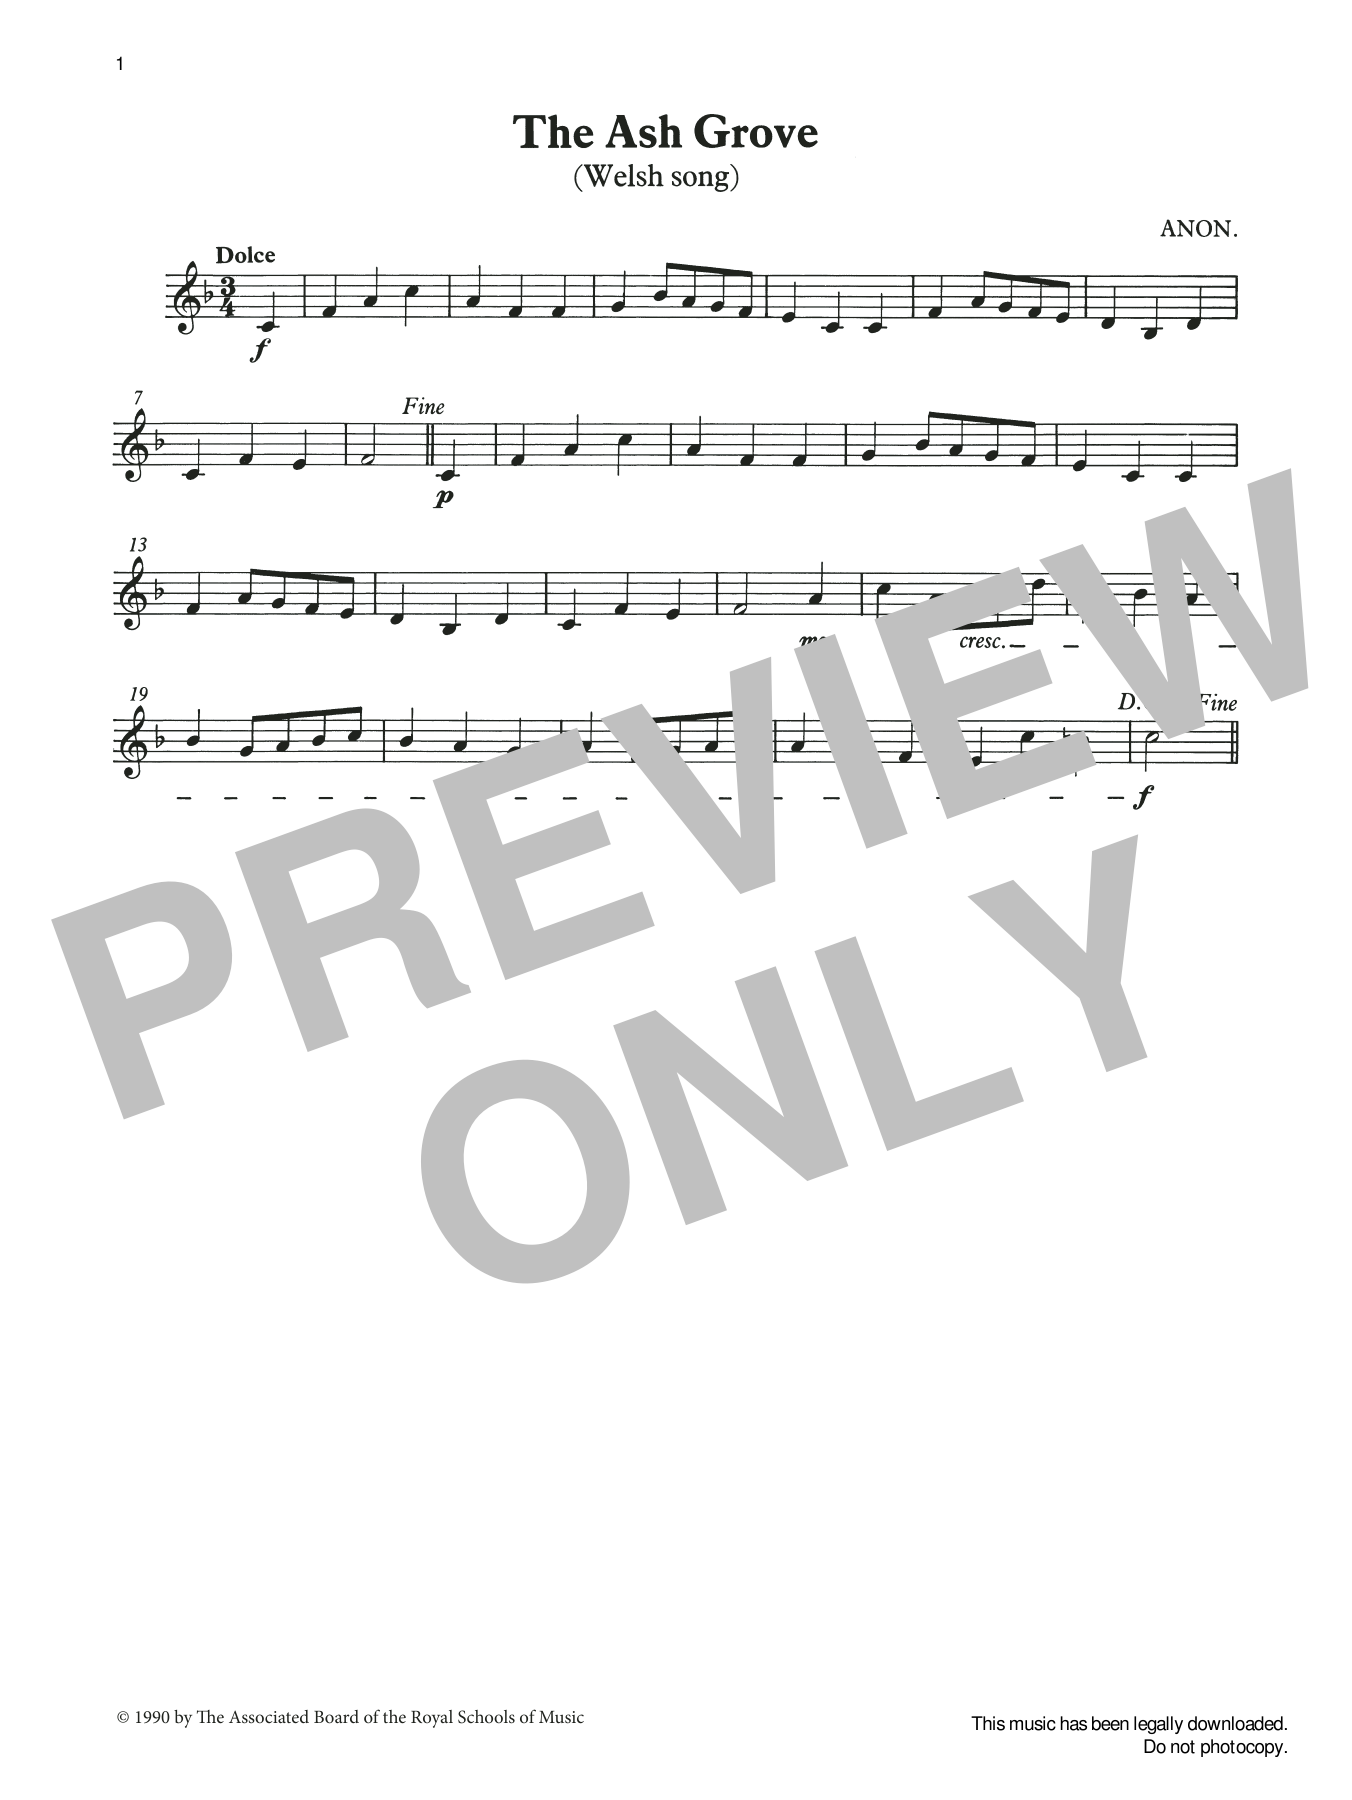 Download Trad. Welsh The Ash Grove from Graded Music for Tun Sheet Music